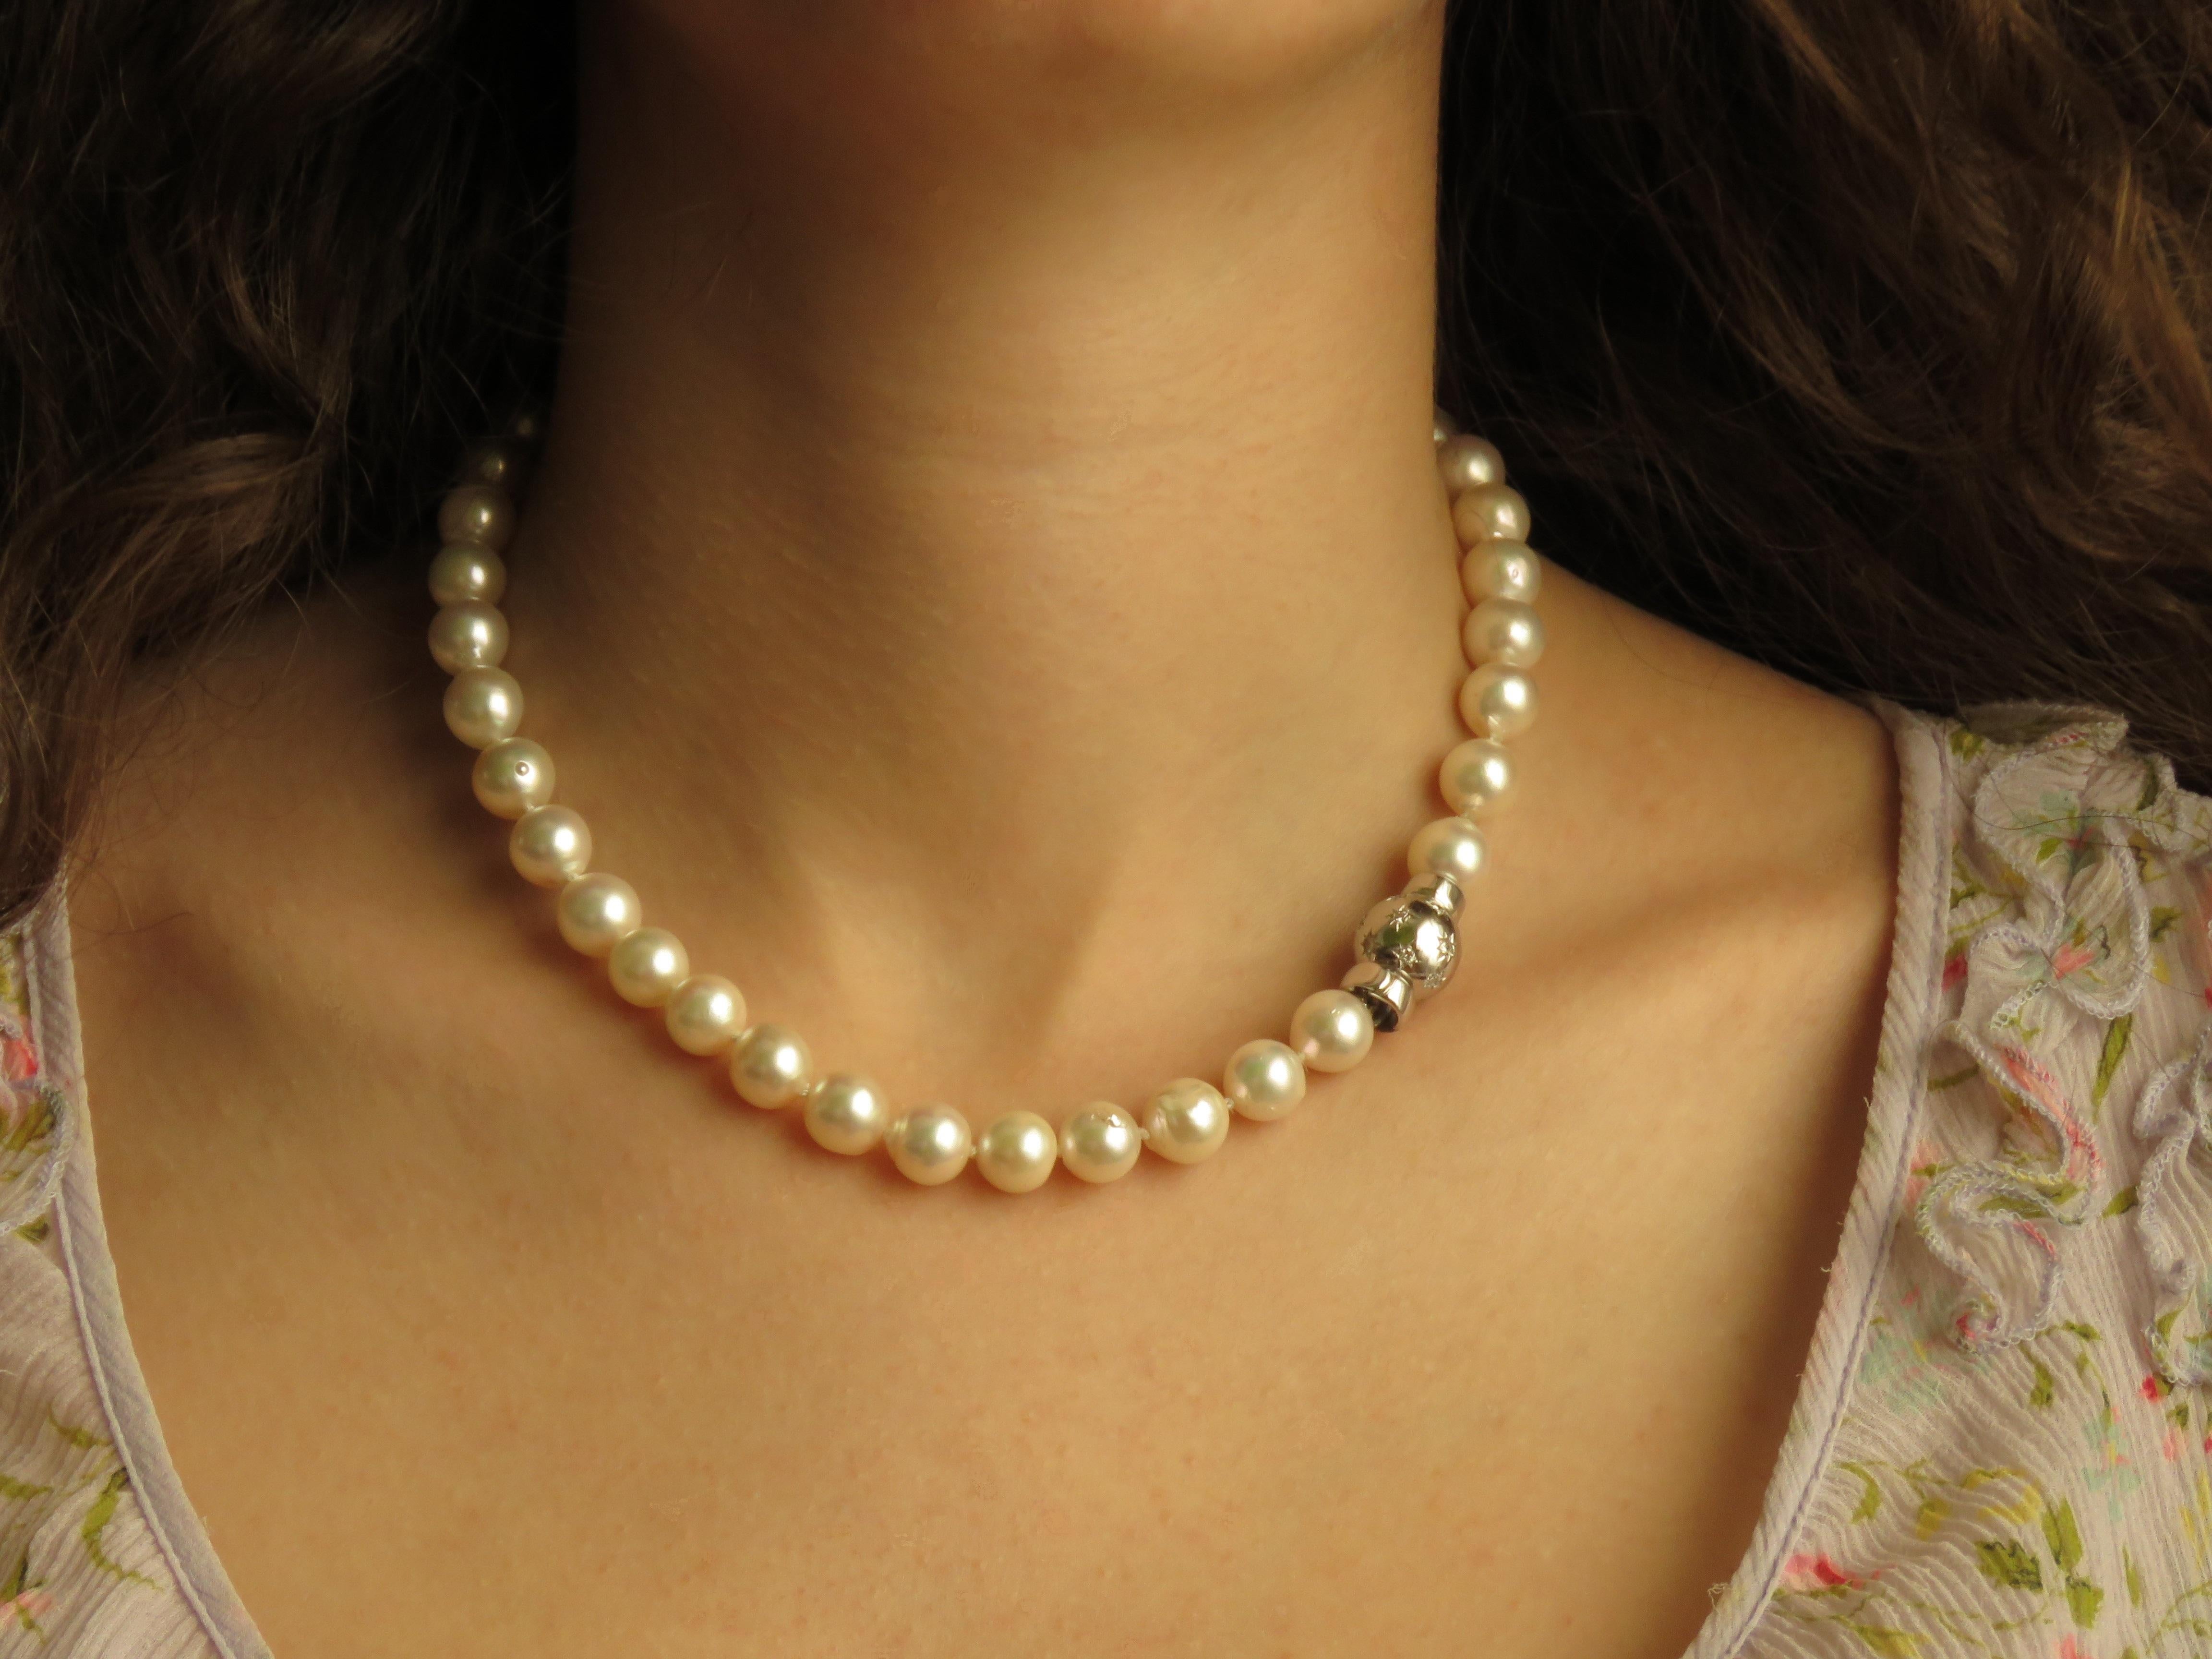 Genuine strand of Japanese Akoya pearls necklace with sphere clasp in 18 karat white gold with brilliant cut white diamonds. The necklace is marked with the Italian Gold Mark 750 and Botta Gioielli brandmark 716MI.

Crafted: in 18 karat white